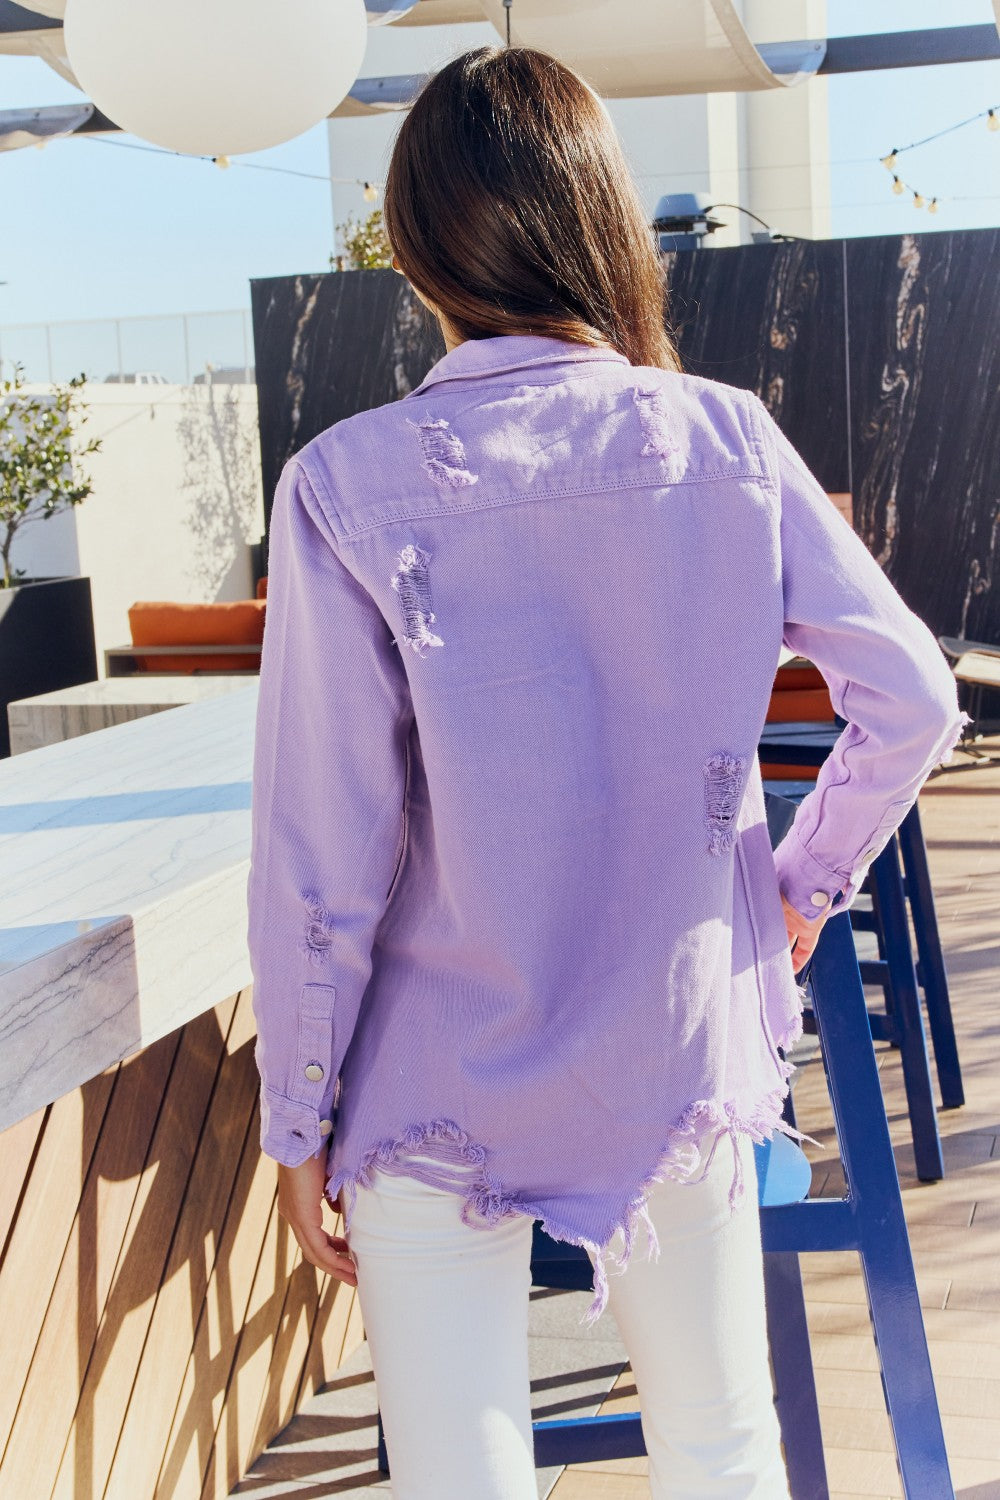 Gray American Bazi Full Size Distressed Button Down Denim Jacket in Lavender Sentient Beauty Fashions Apparel & Accessories